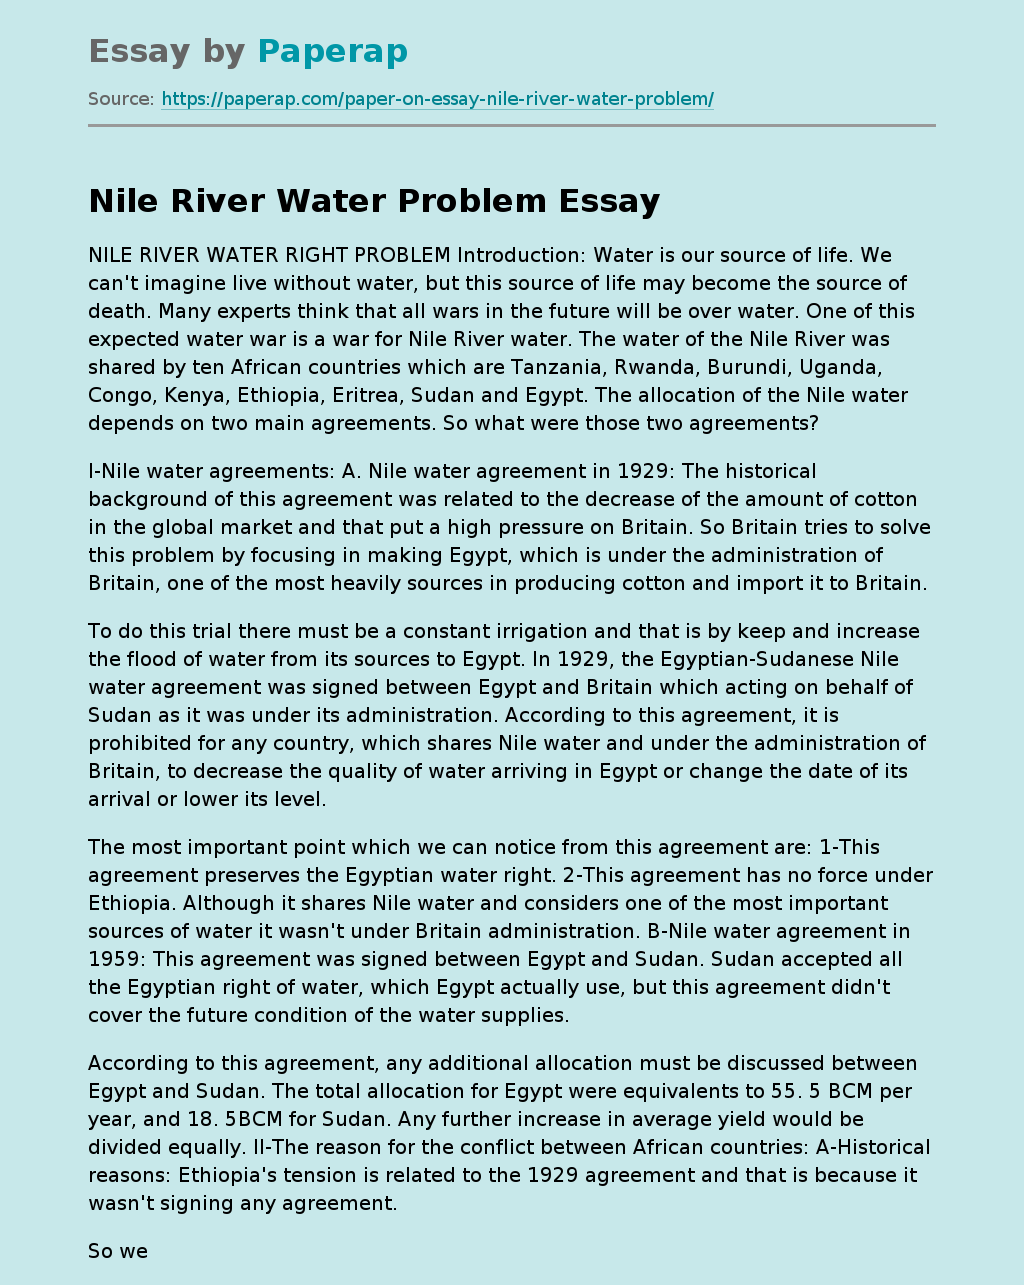 Nile River Water Problem